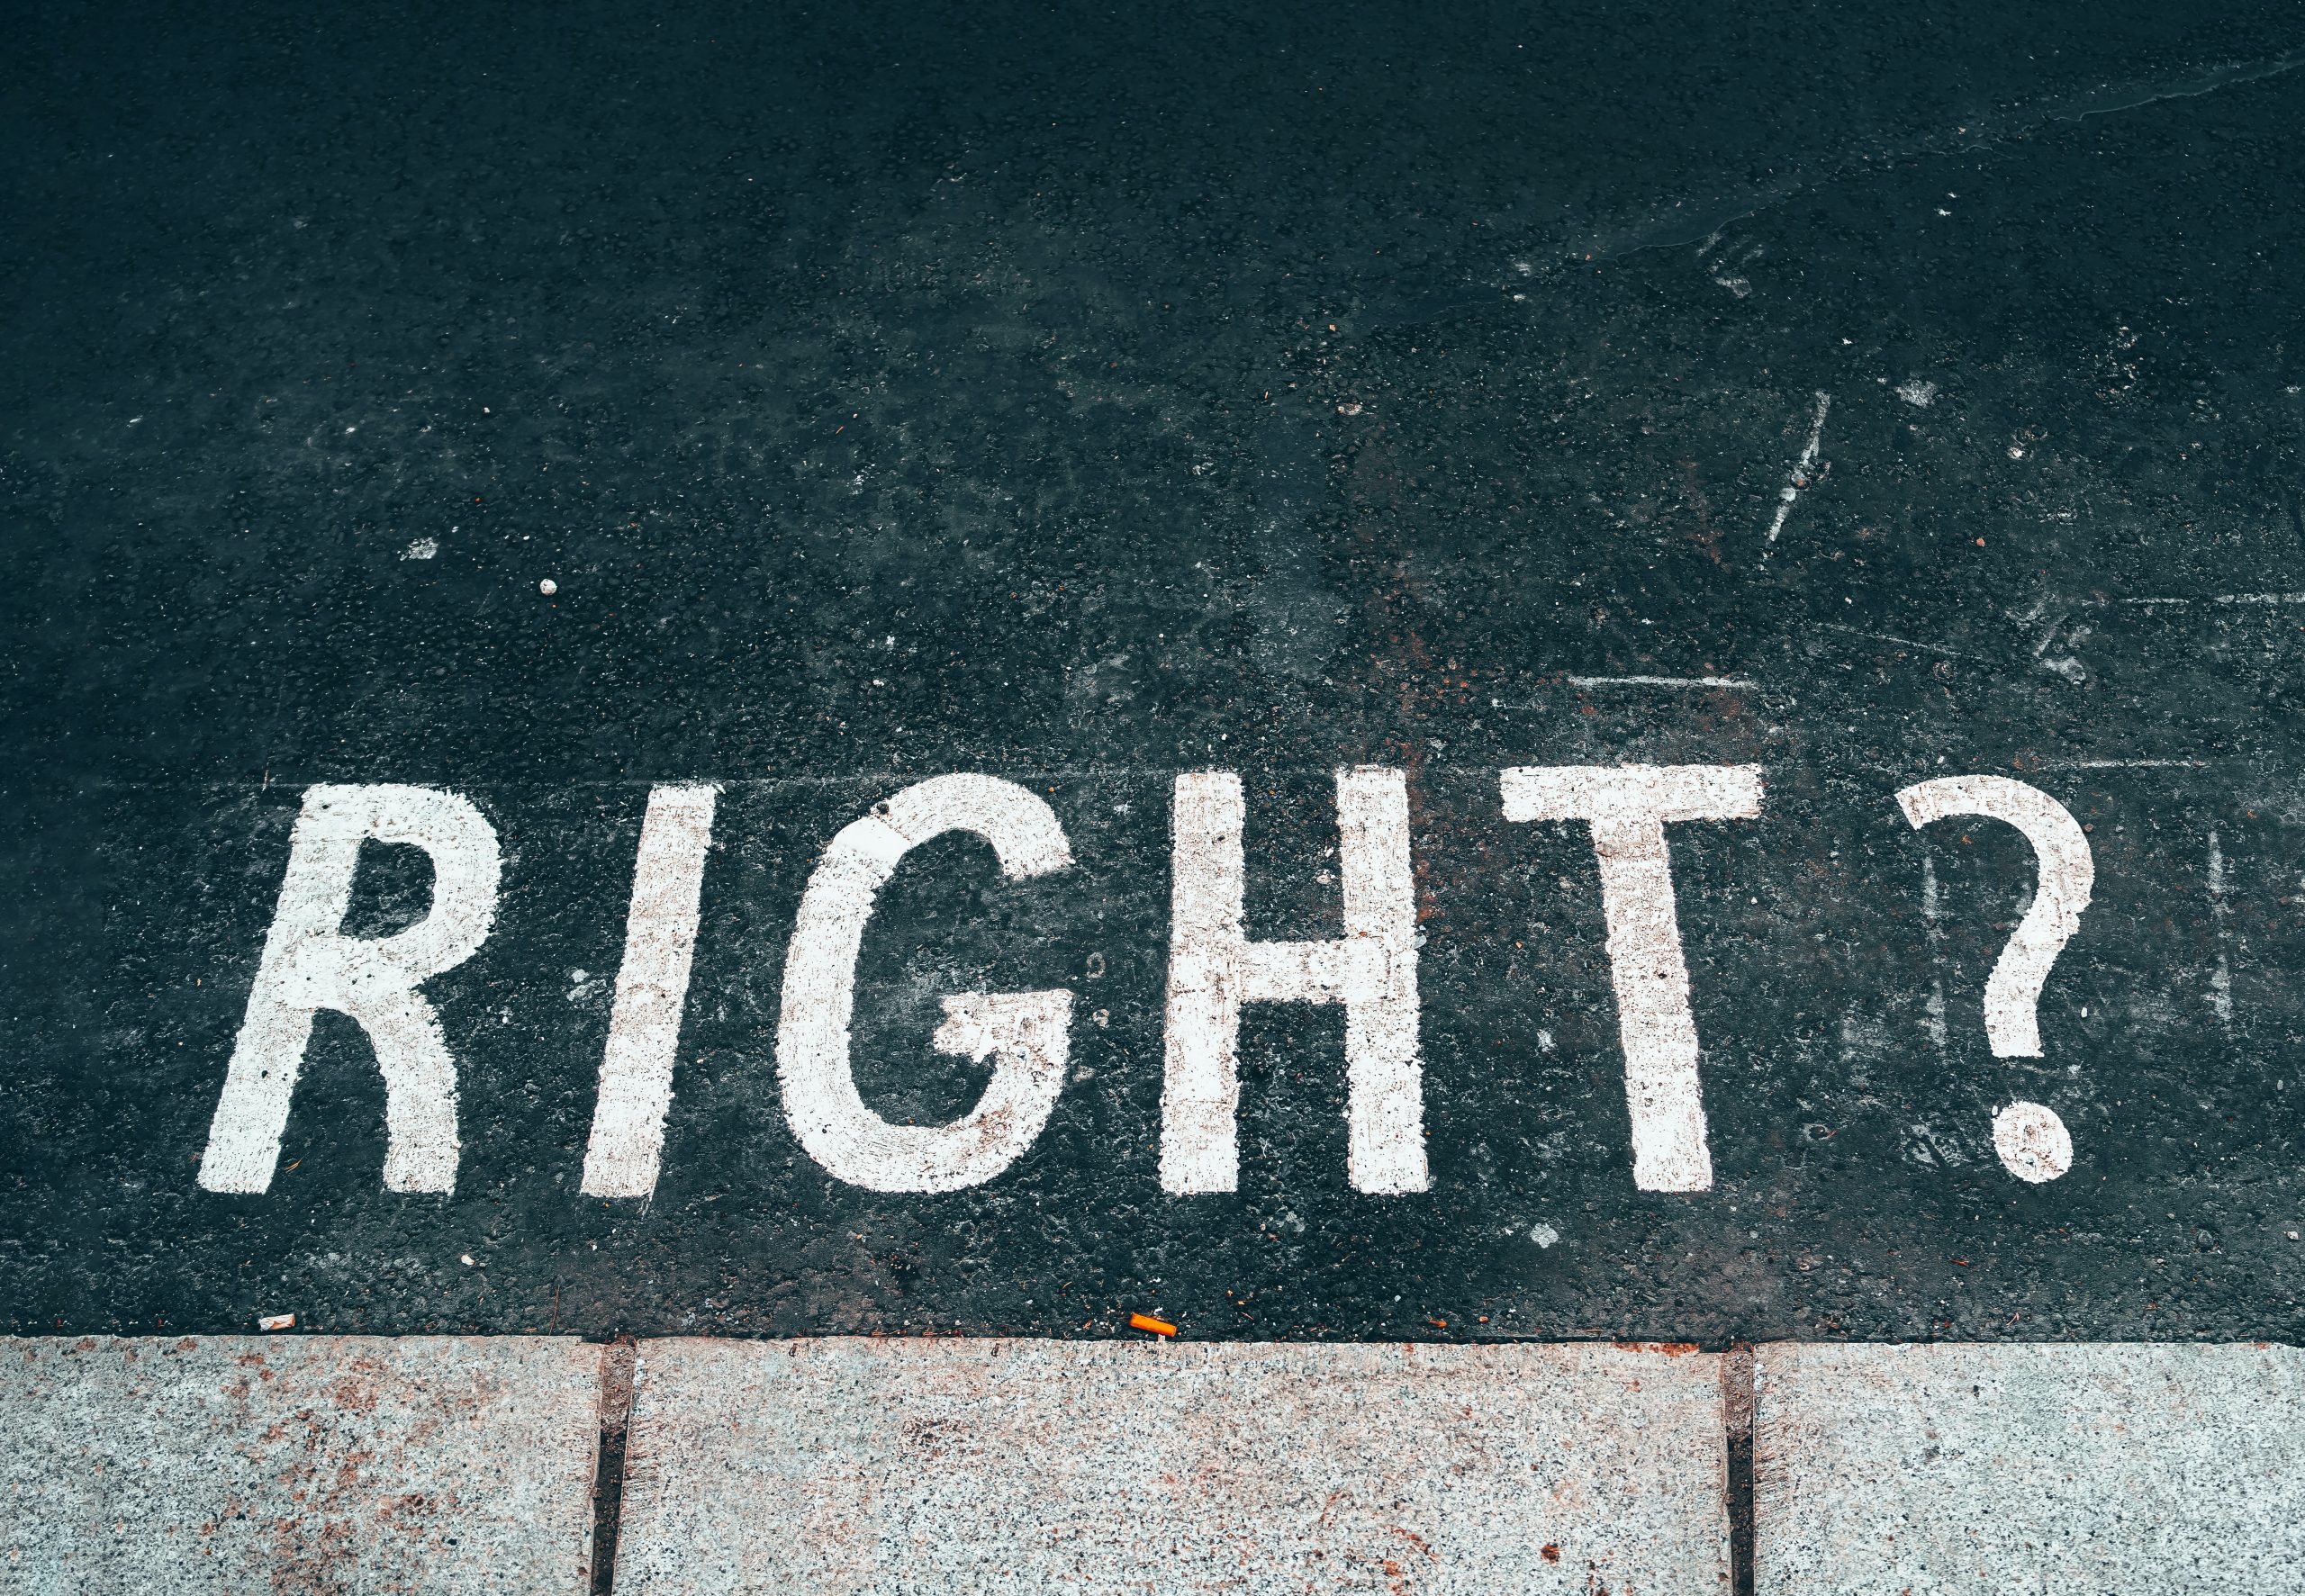 White text in capital letters reads "right?" on a black pavement.